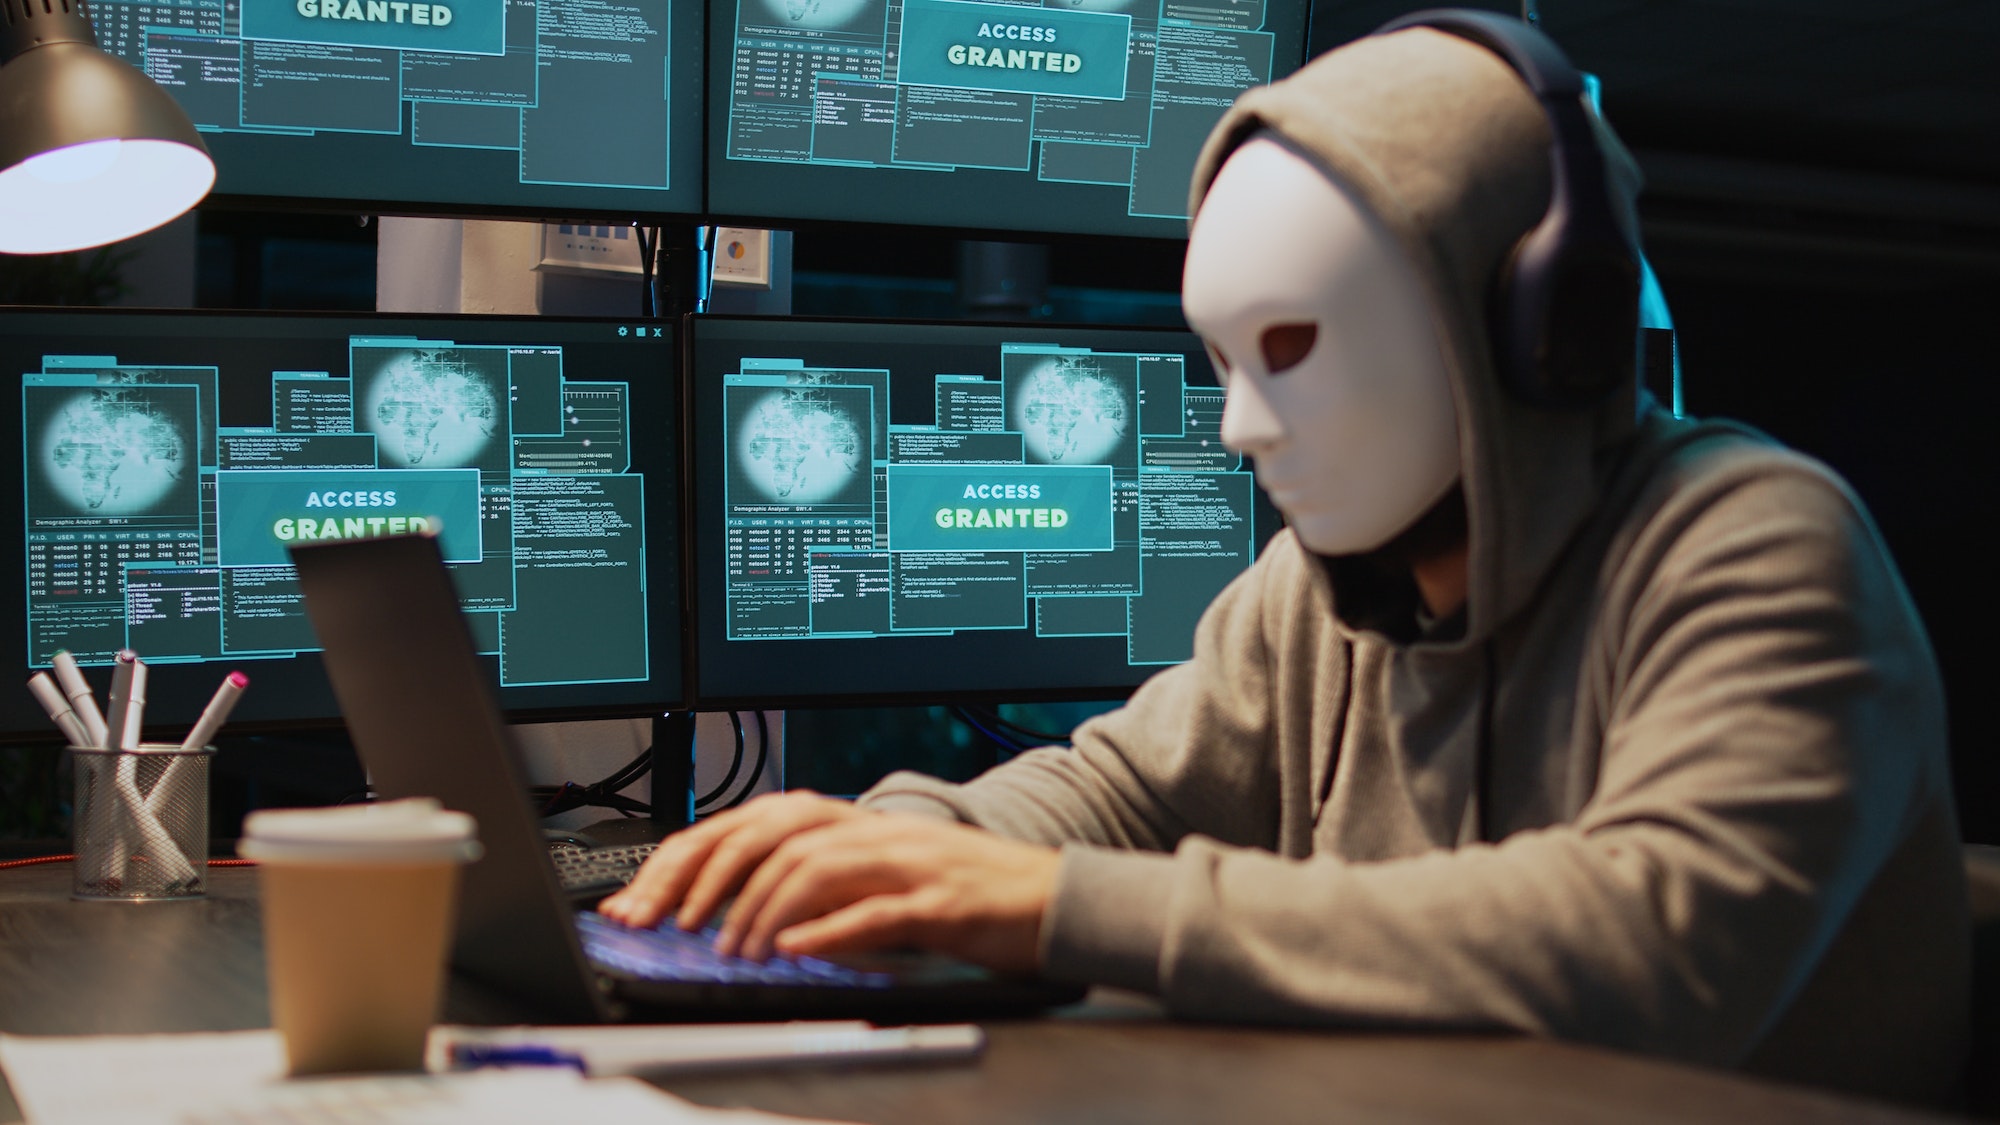 Masked cyber thief hacking computer network at night